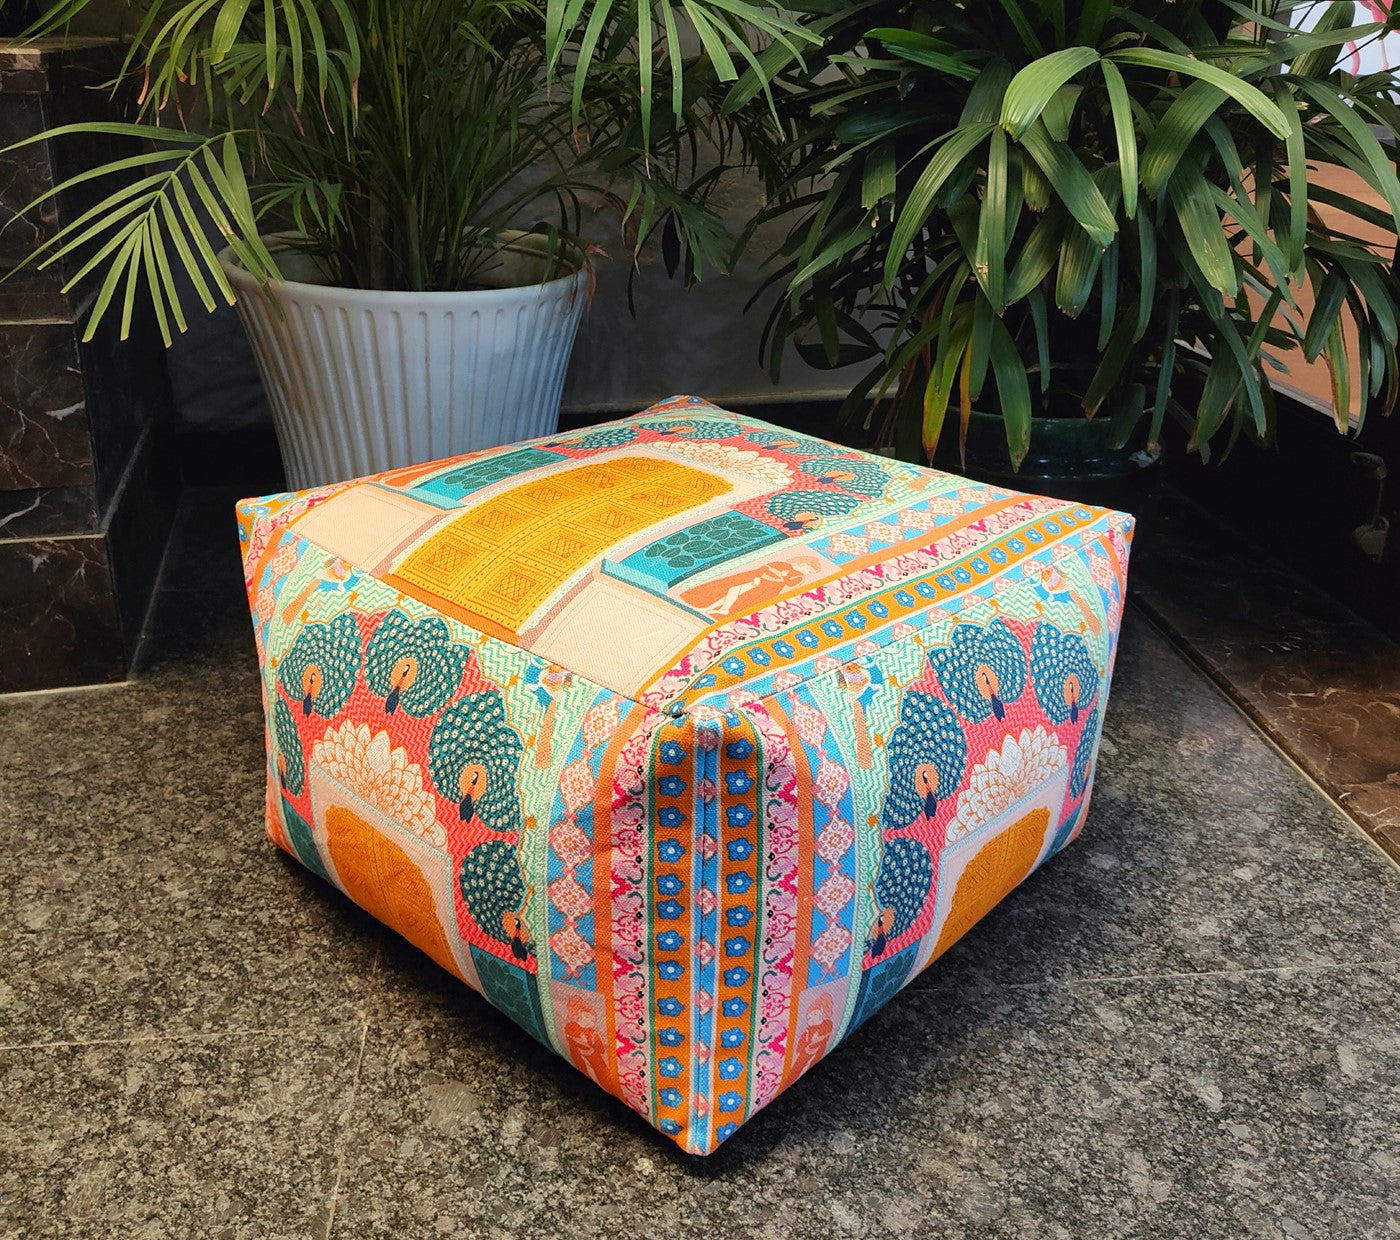 The Peacock Gate Pouffe